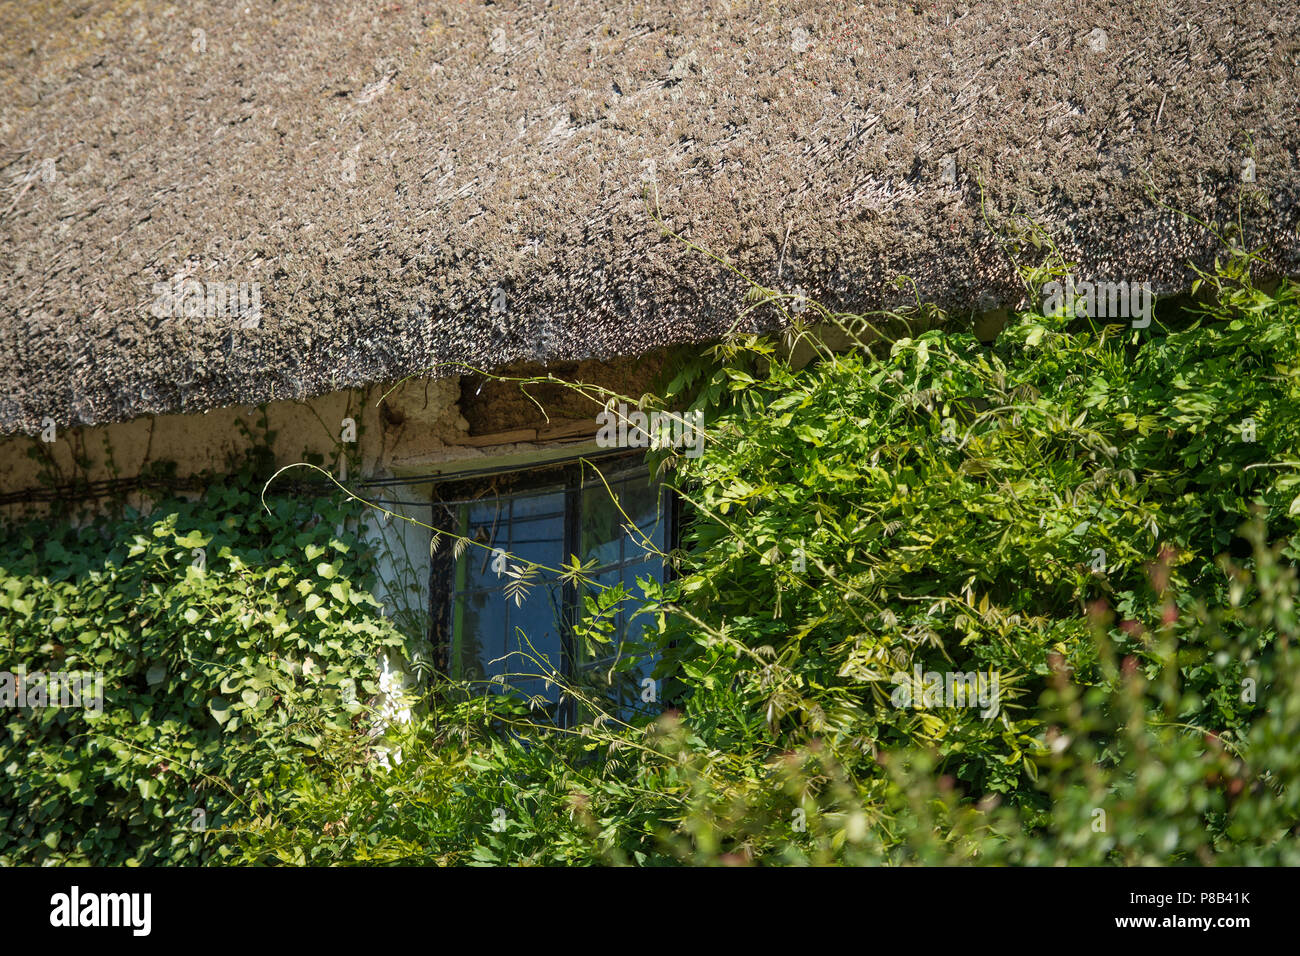 creeper taking over a house with thatched roof Stock Photo